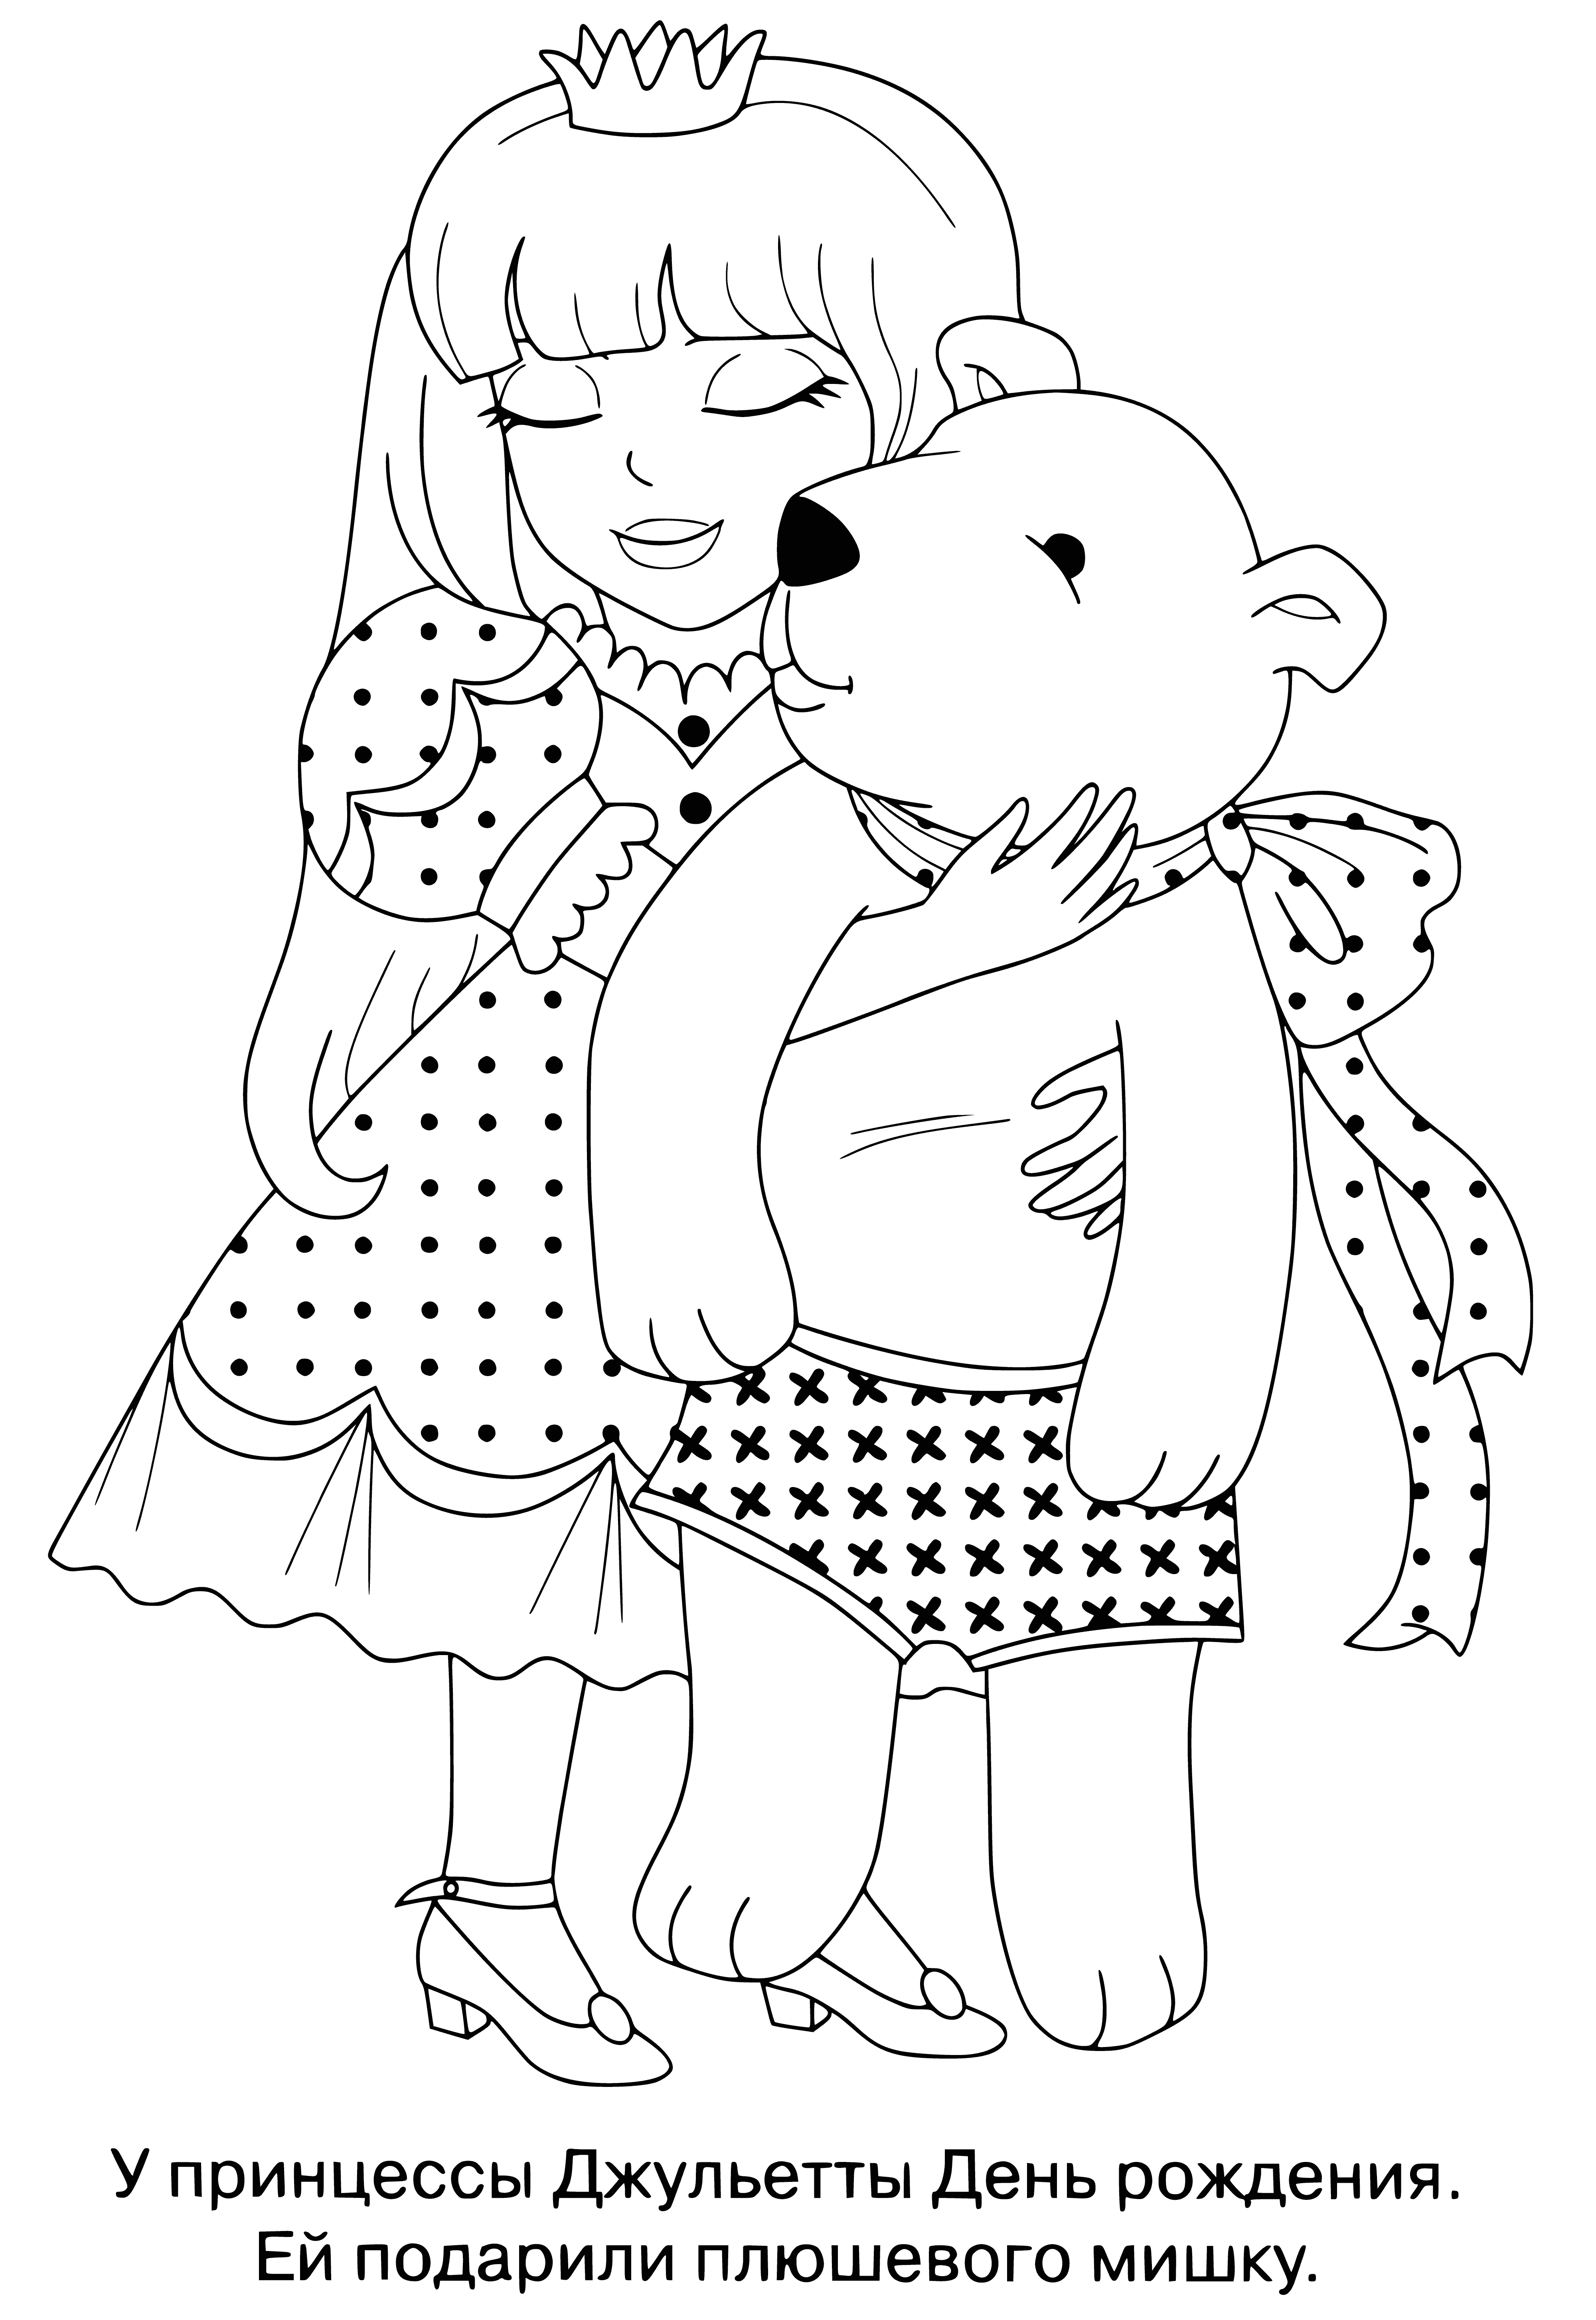 coloring page: Princess Juliet holds a flower and wears a crown, bow-adorned dress in a coloring page. #coloringpage #princessjuliet